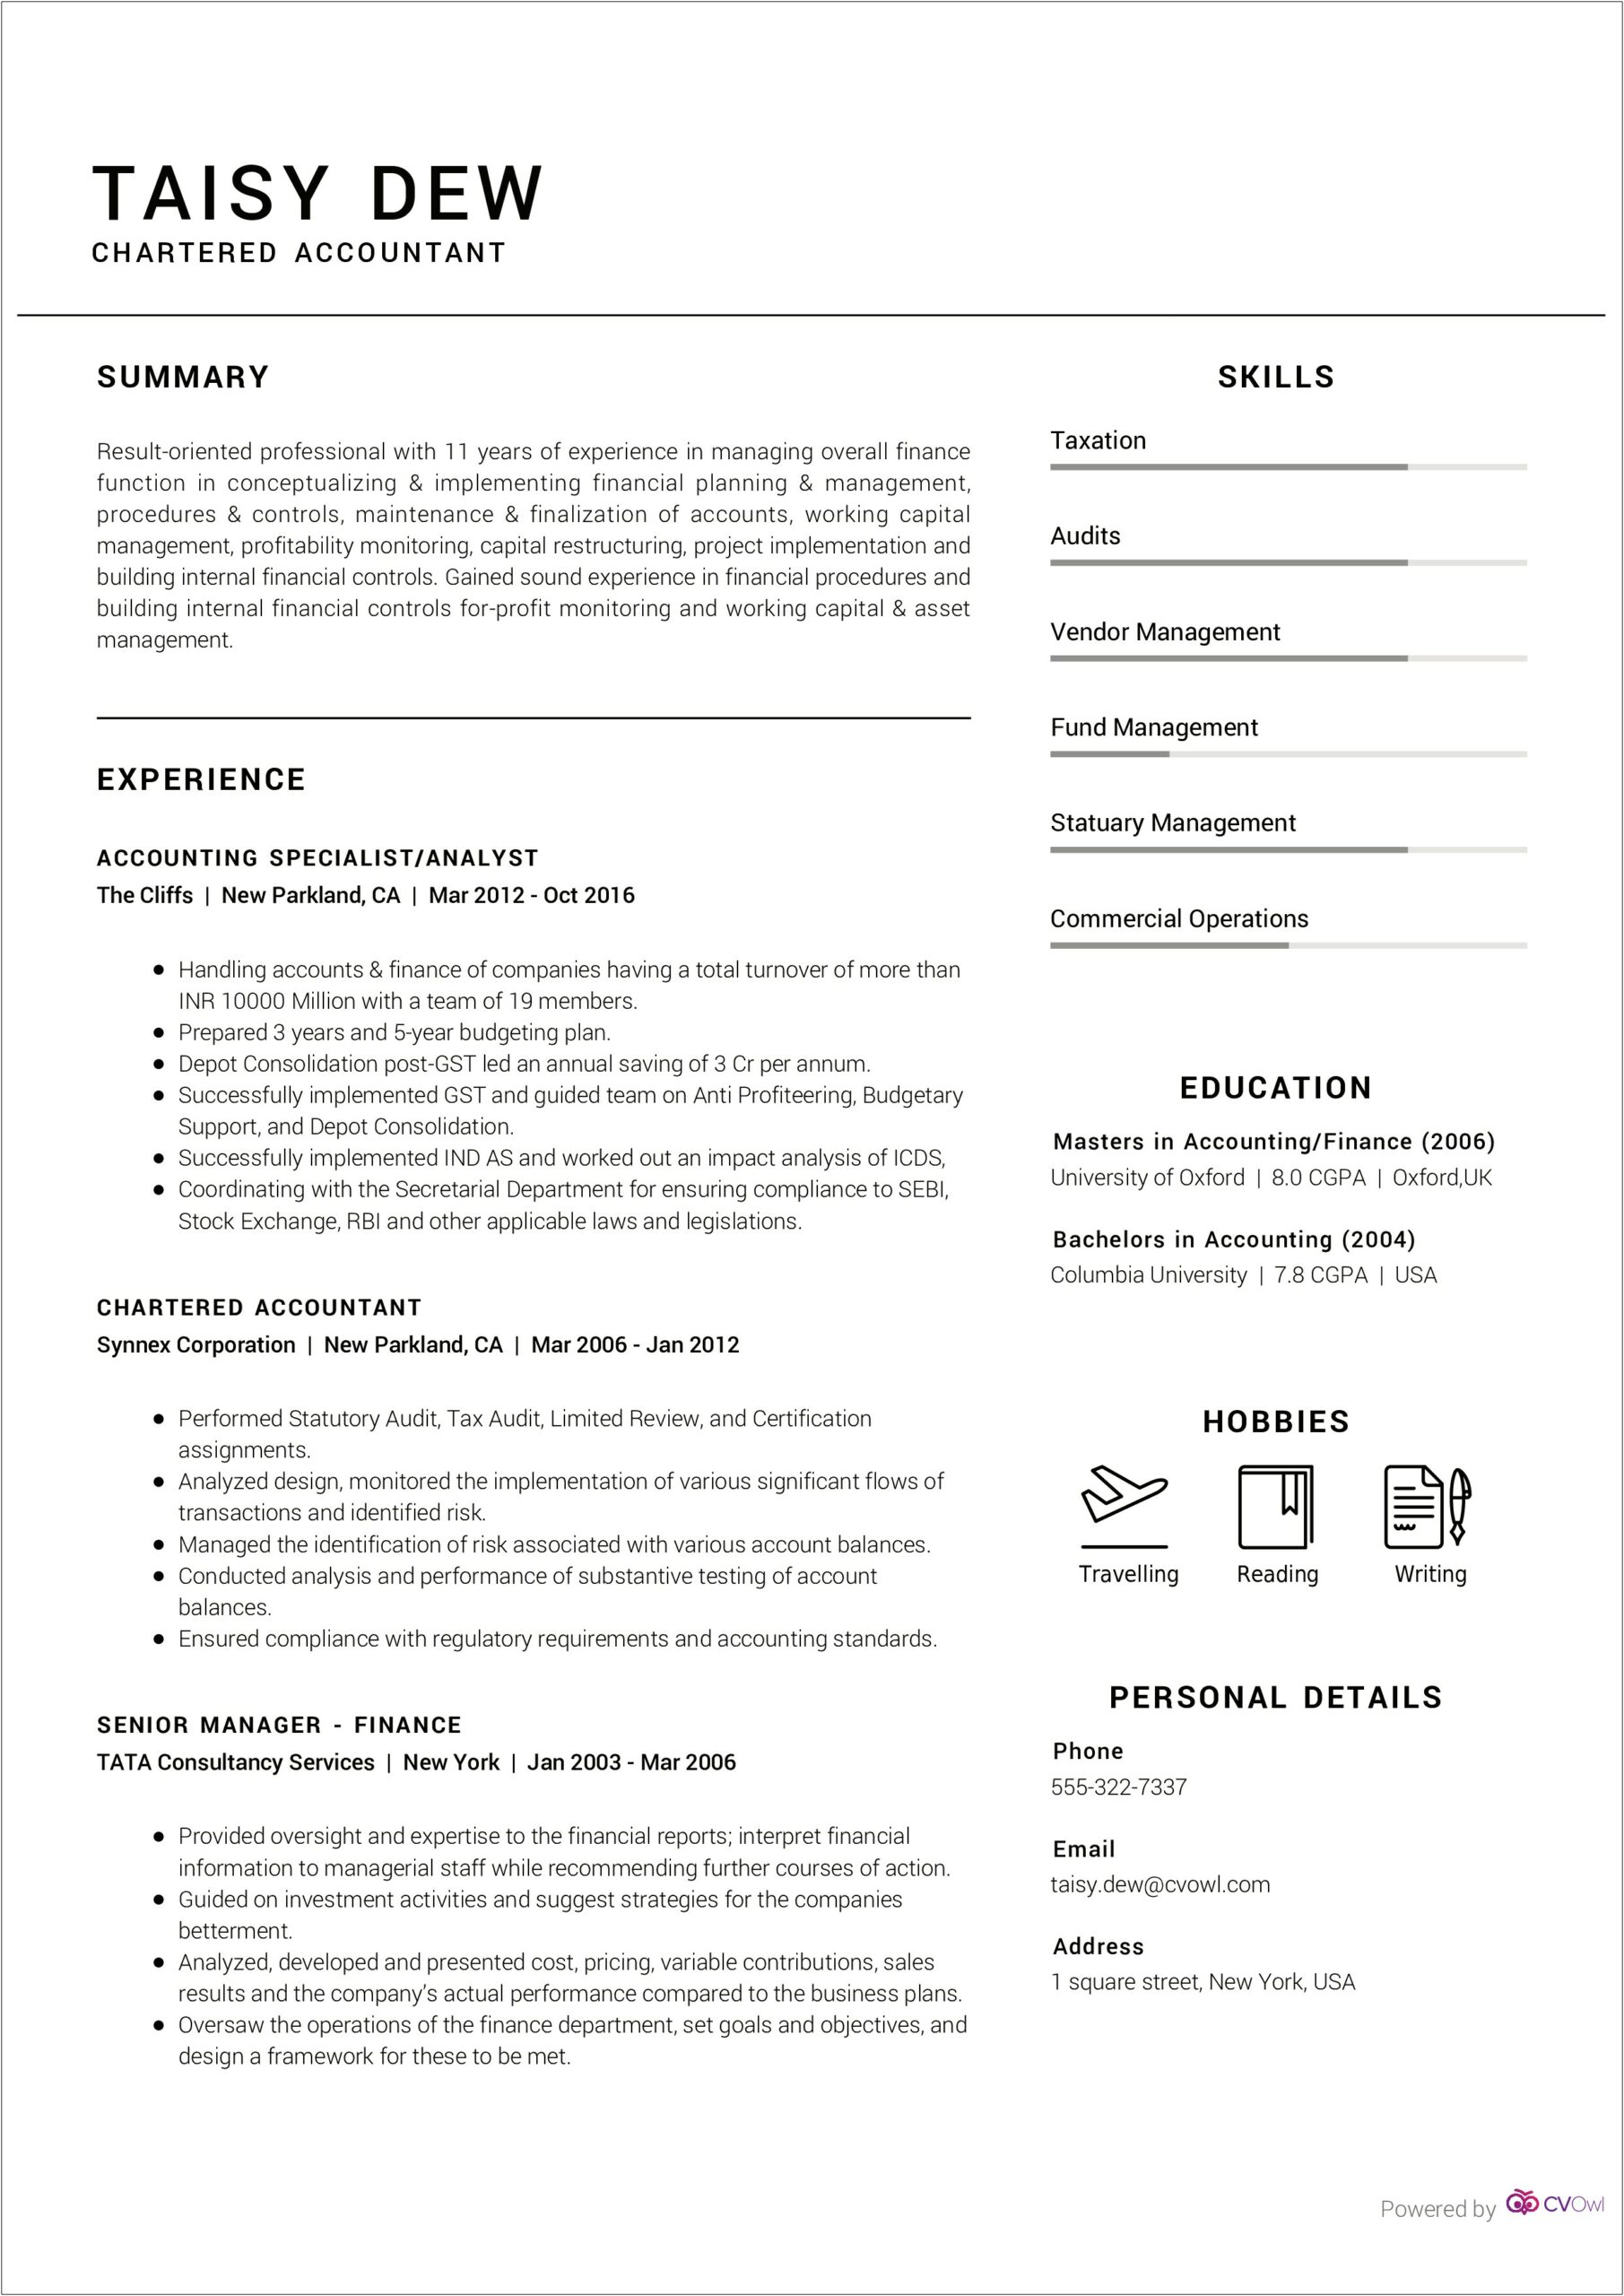 Education Before Or After Experience In Resume